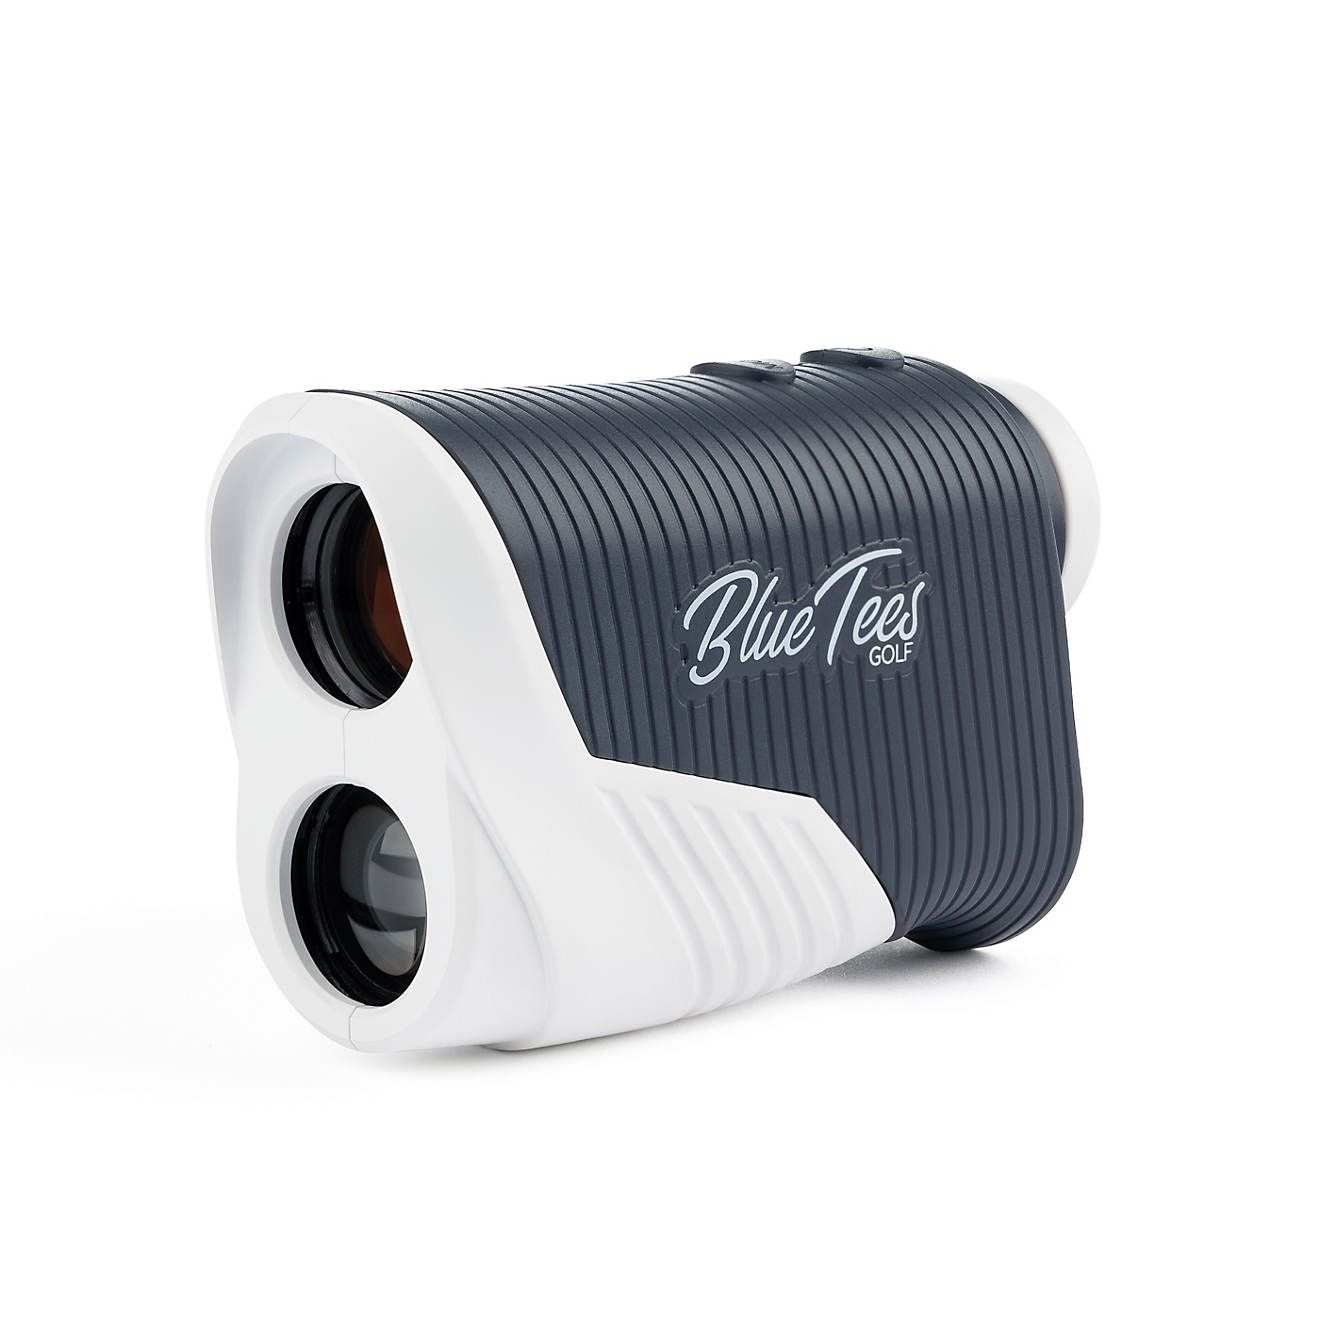 Blue Tees Golf Series 2 PRO Slope Rangefinder | Academy | Academy Sports + Outdoors